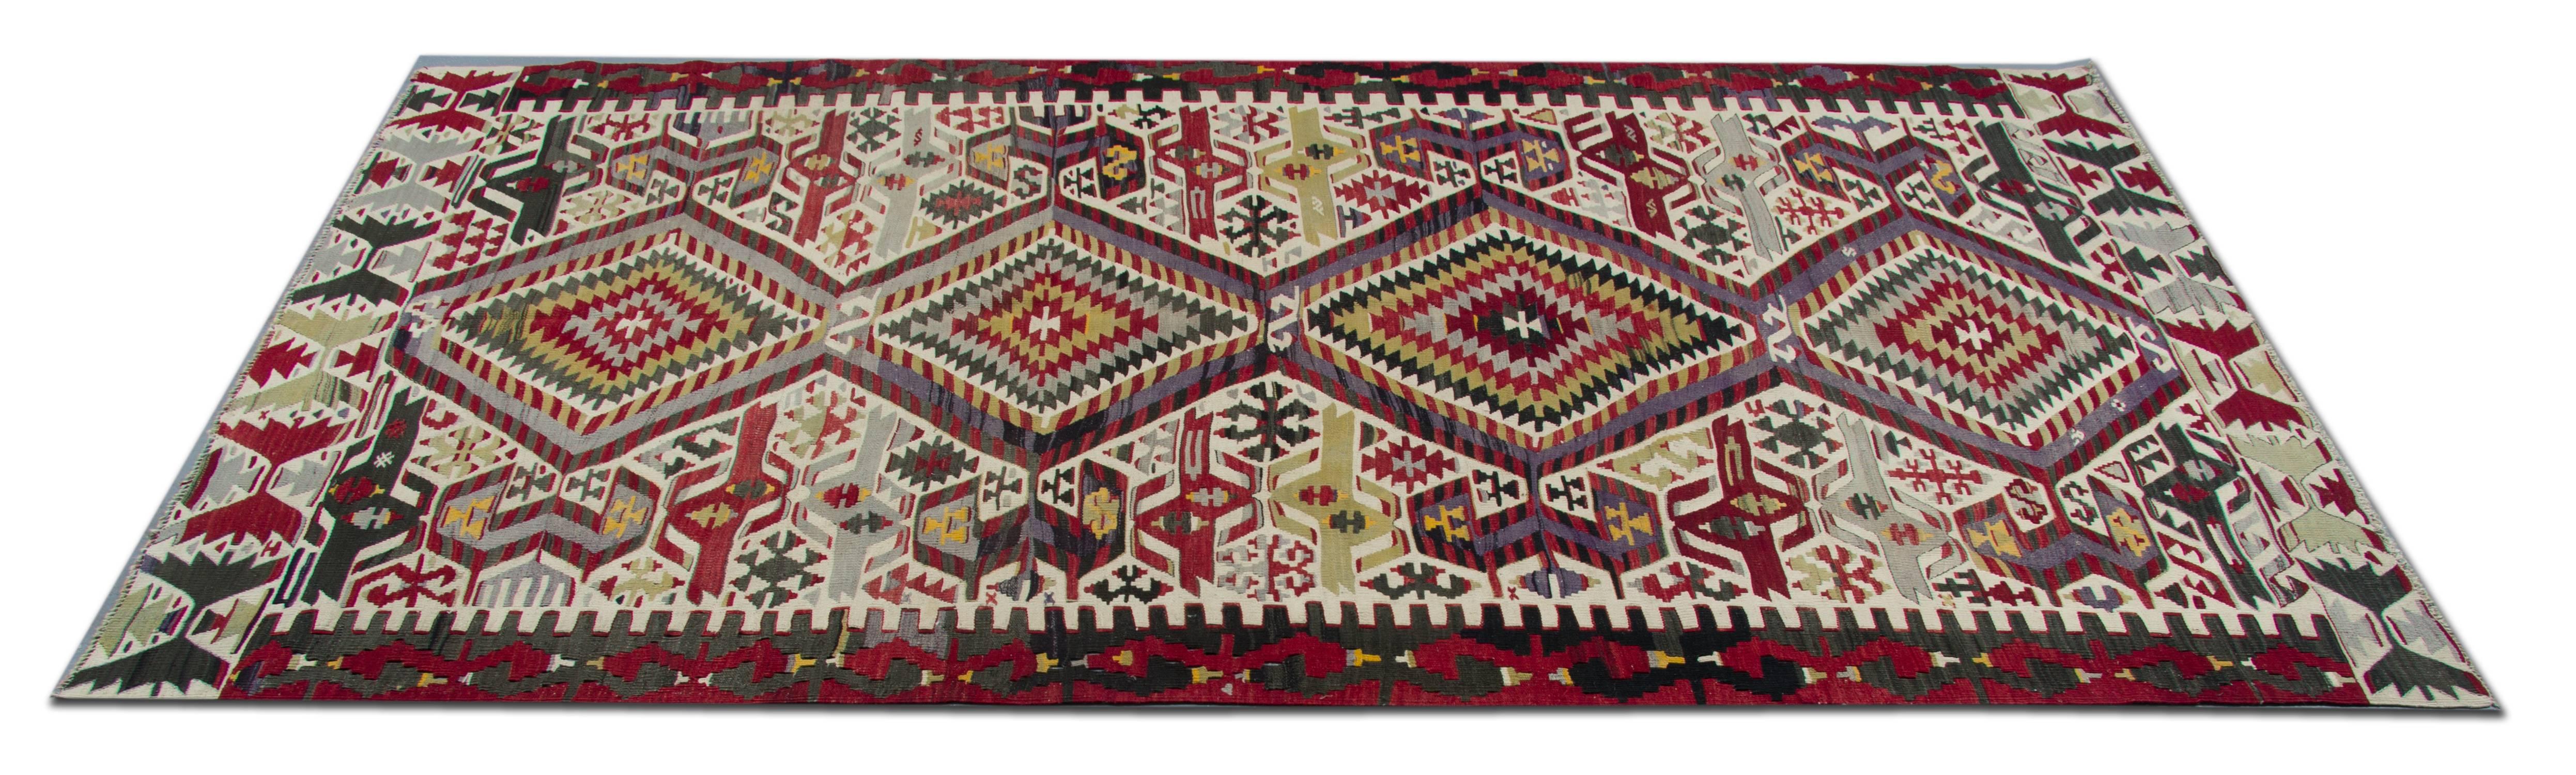 This handmade carpet Turkish rug is an antique rug. Traditional handwoven runner rugs come from Turkey. The carpet design world. This kind of carpet runner is suitable for stair runners and hallway rugs, in a striking colour combination of bright